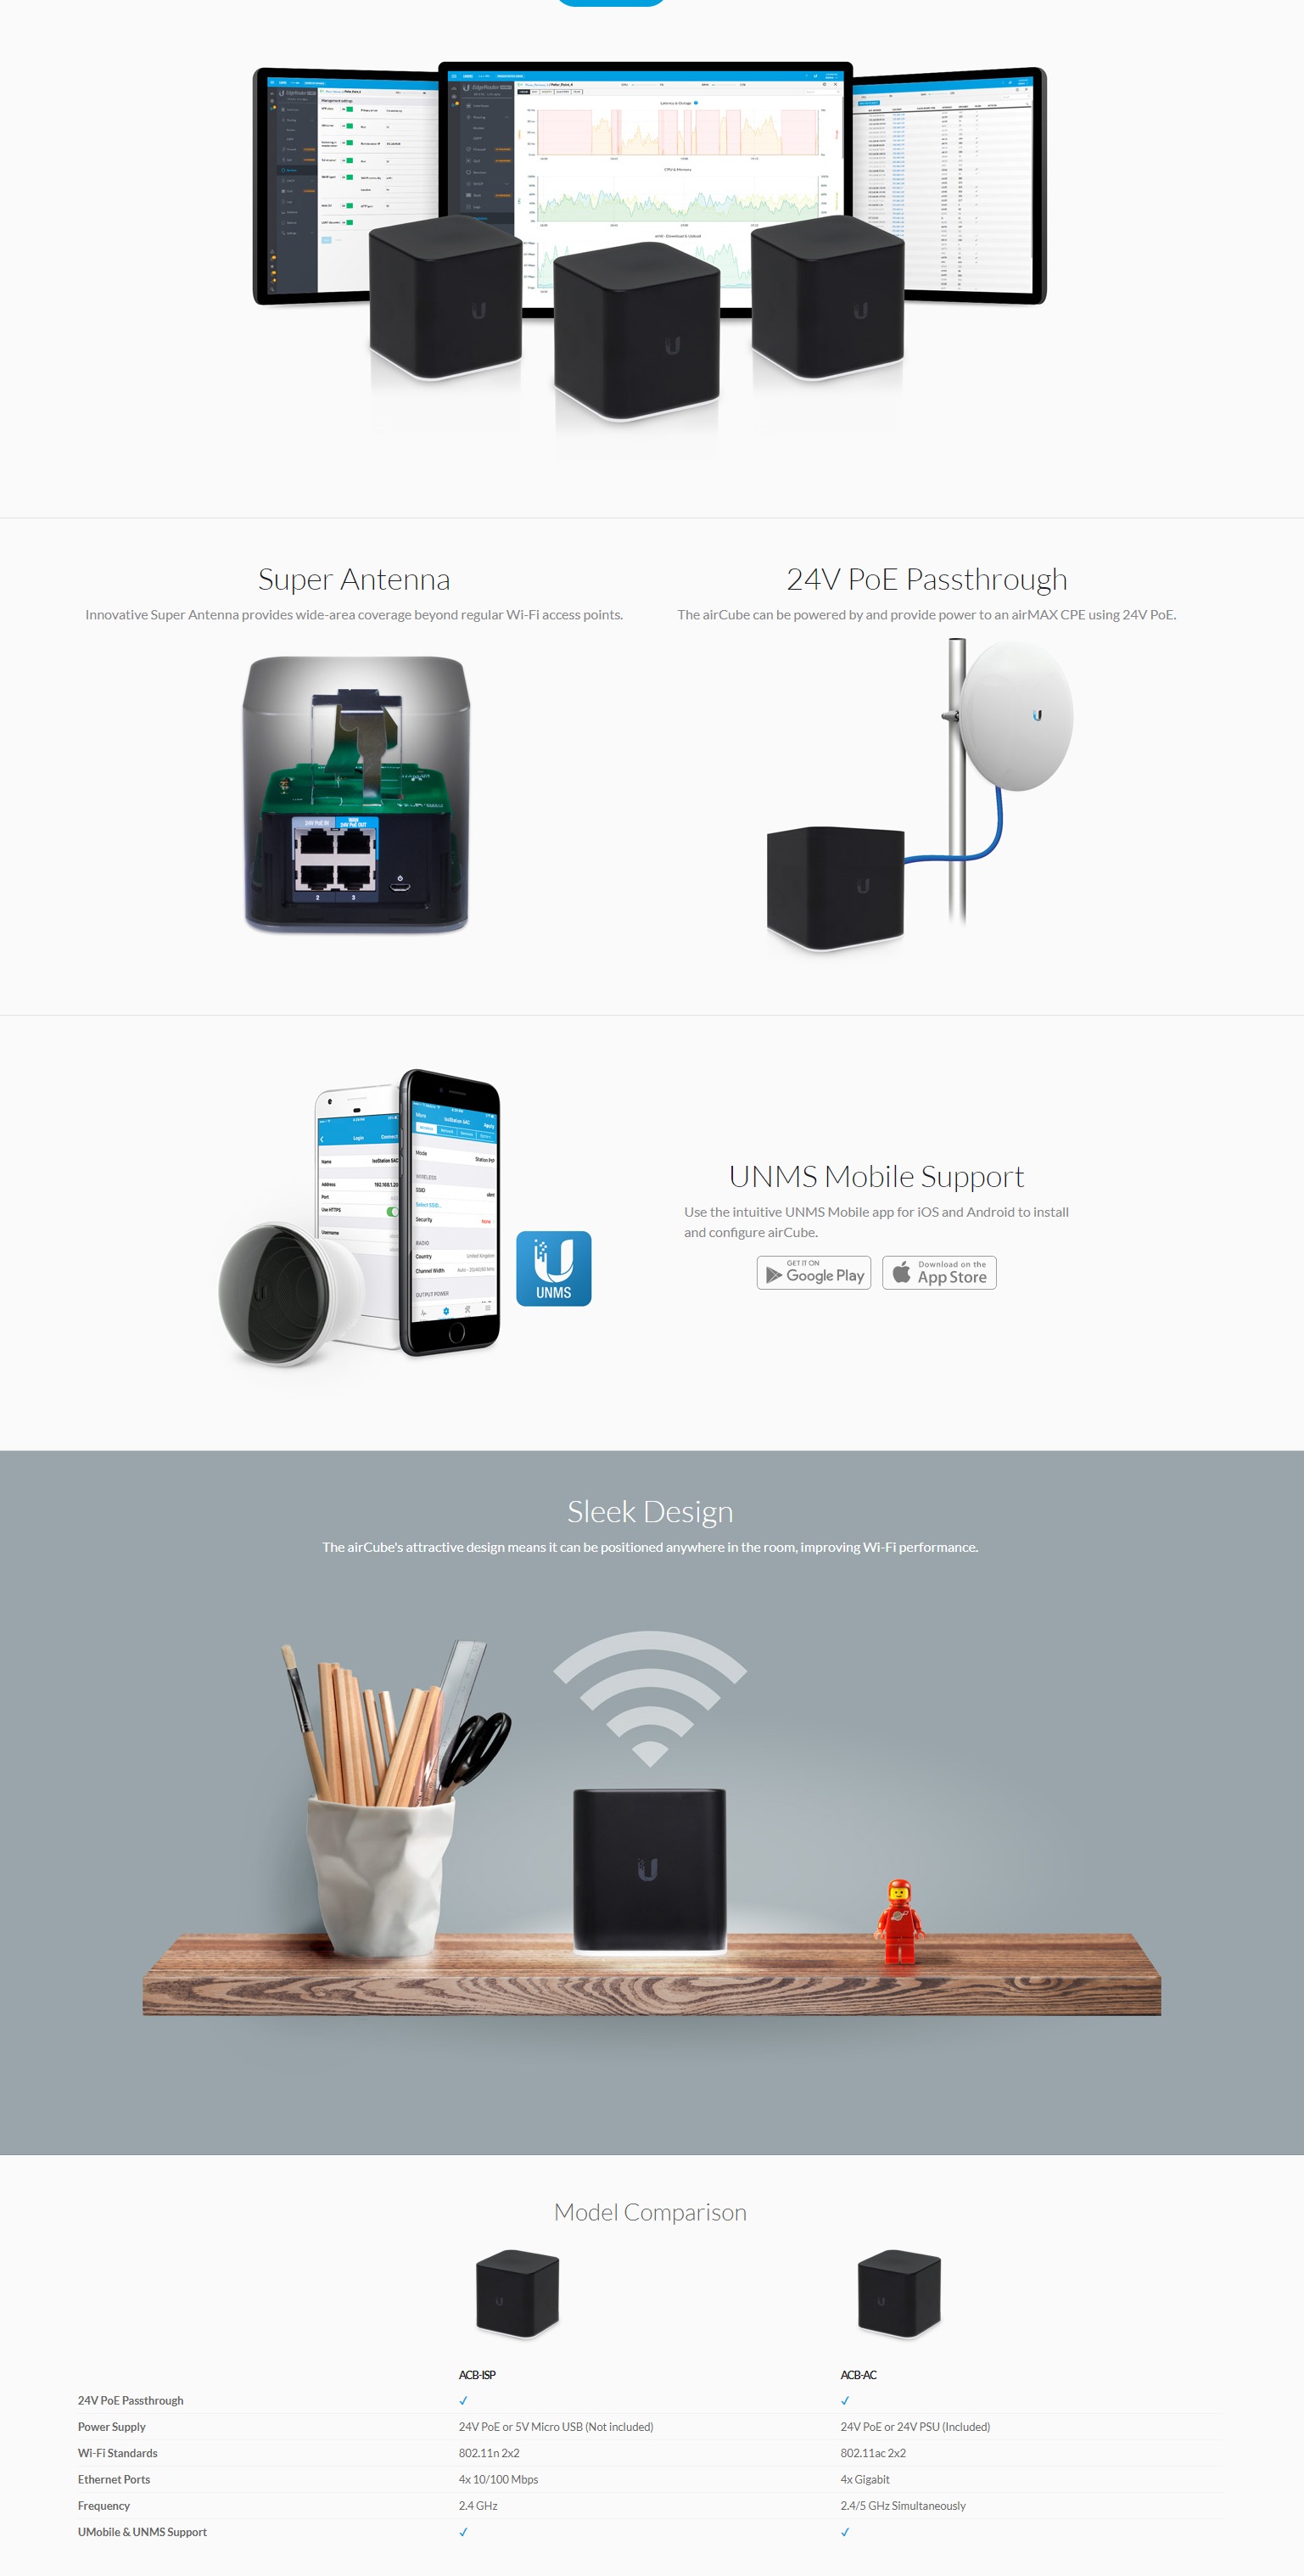 A large marketing image providing additional information about the product Ubiquiti airCube Home WiFi Access Point - Additional alt info not provided